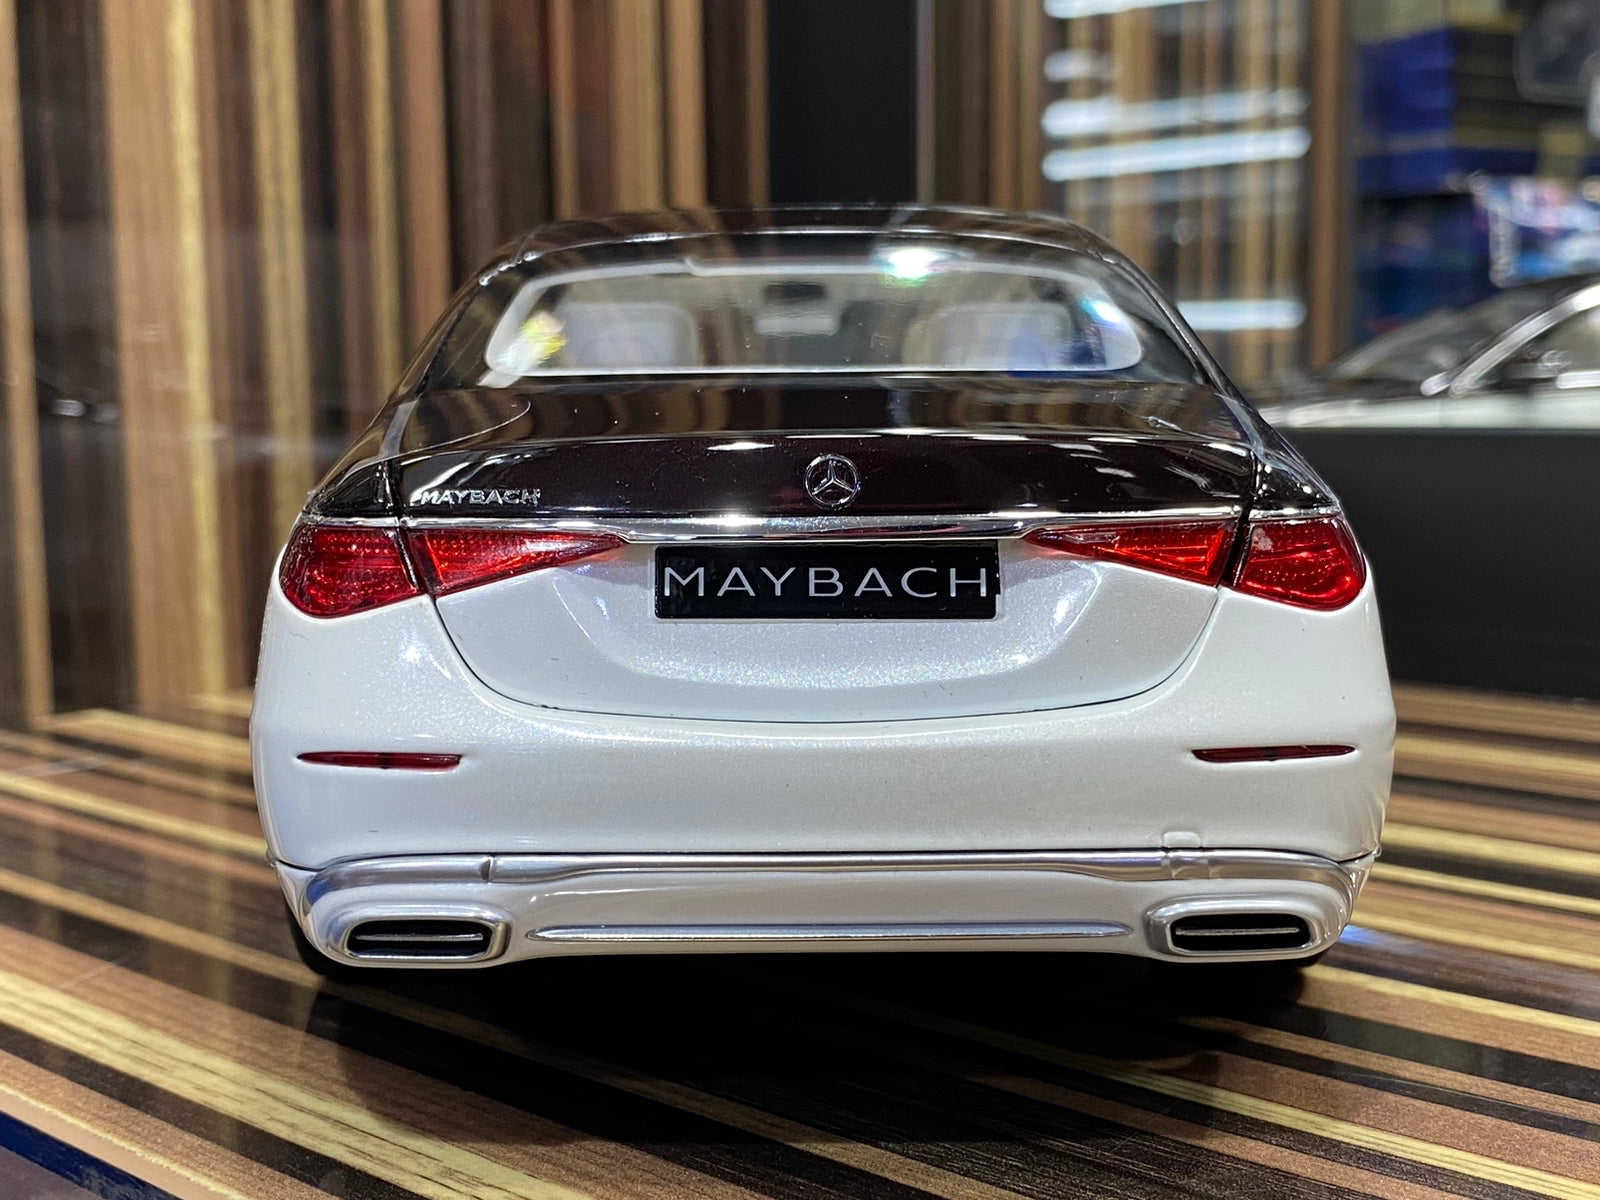 1/18 Diecast Mercedes-Maybach S-Class 2021 White & Black Norev Scale Model Car